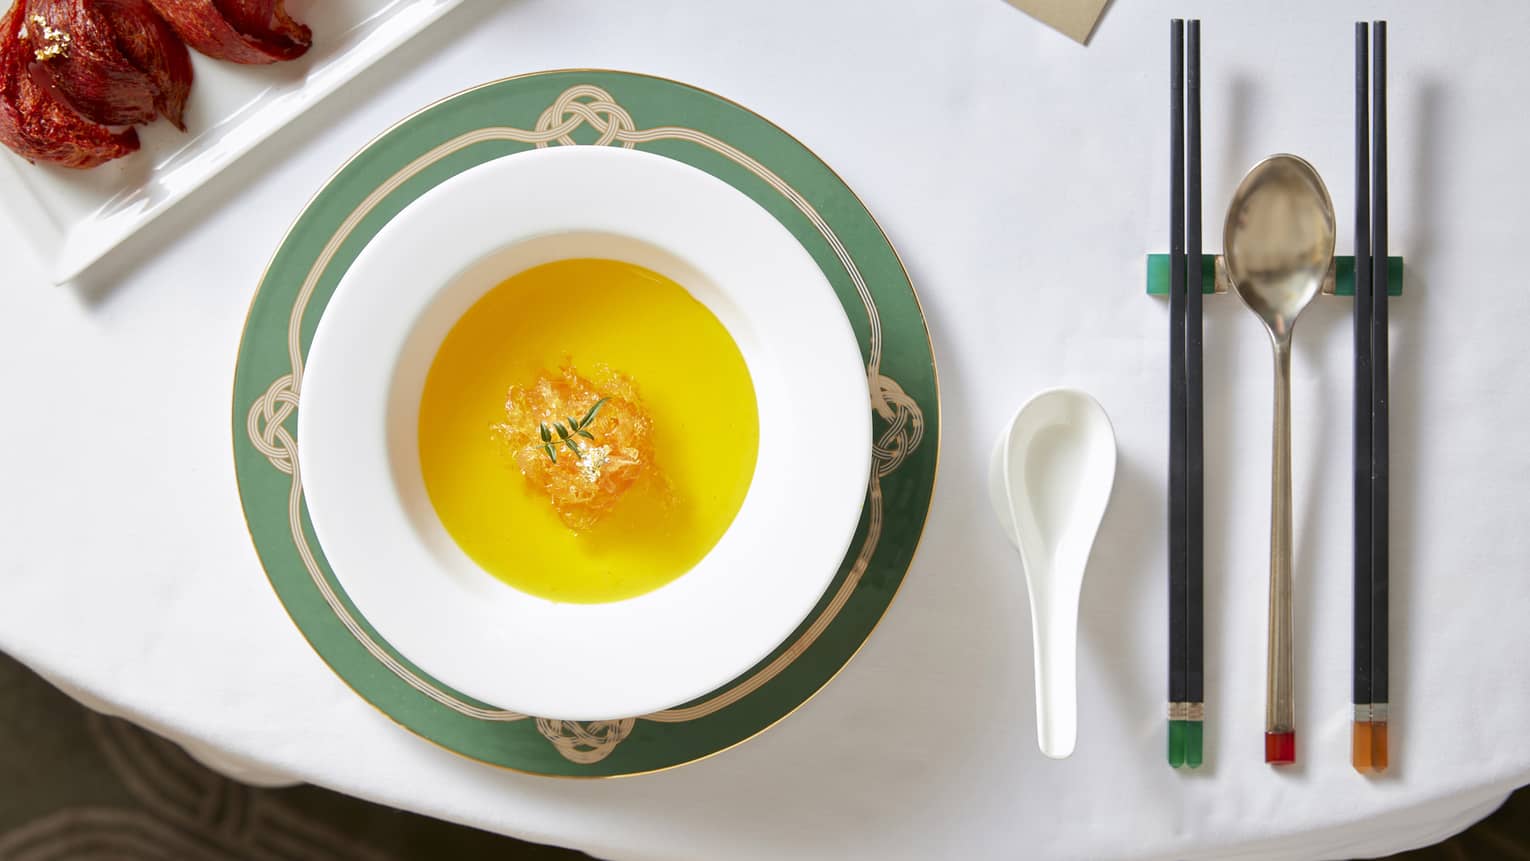 Golden bird’s nest soup in a white bowl on a decorative green and gold charger plate, set with chopsticks and spoons.